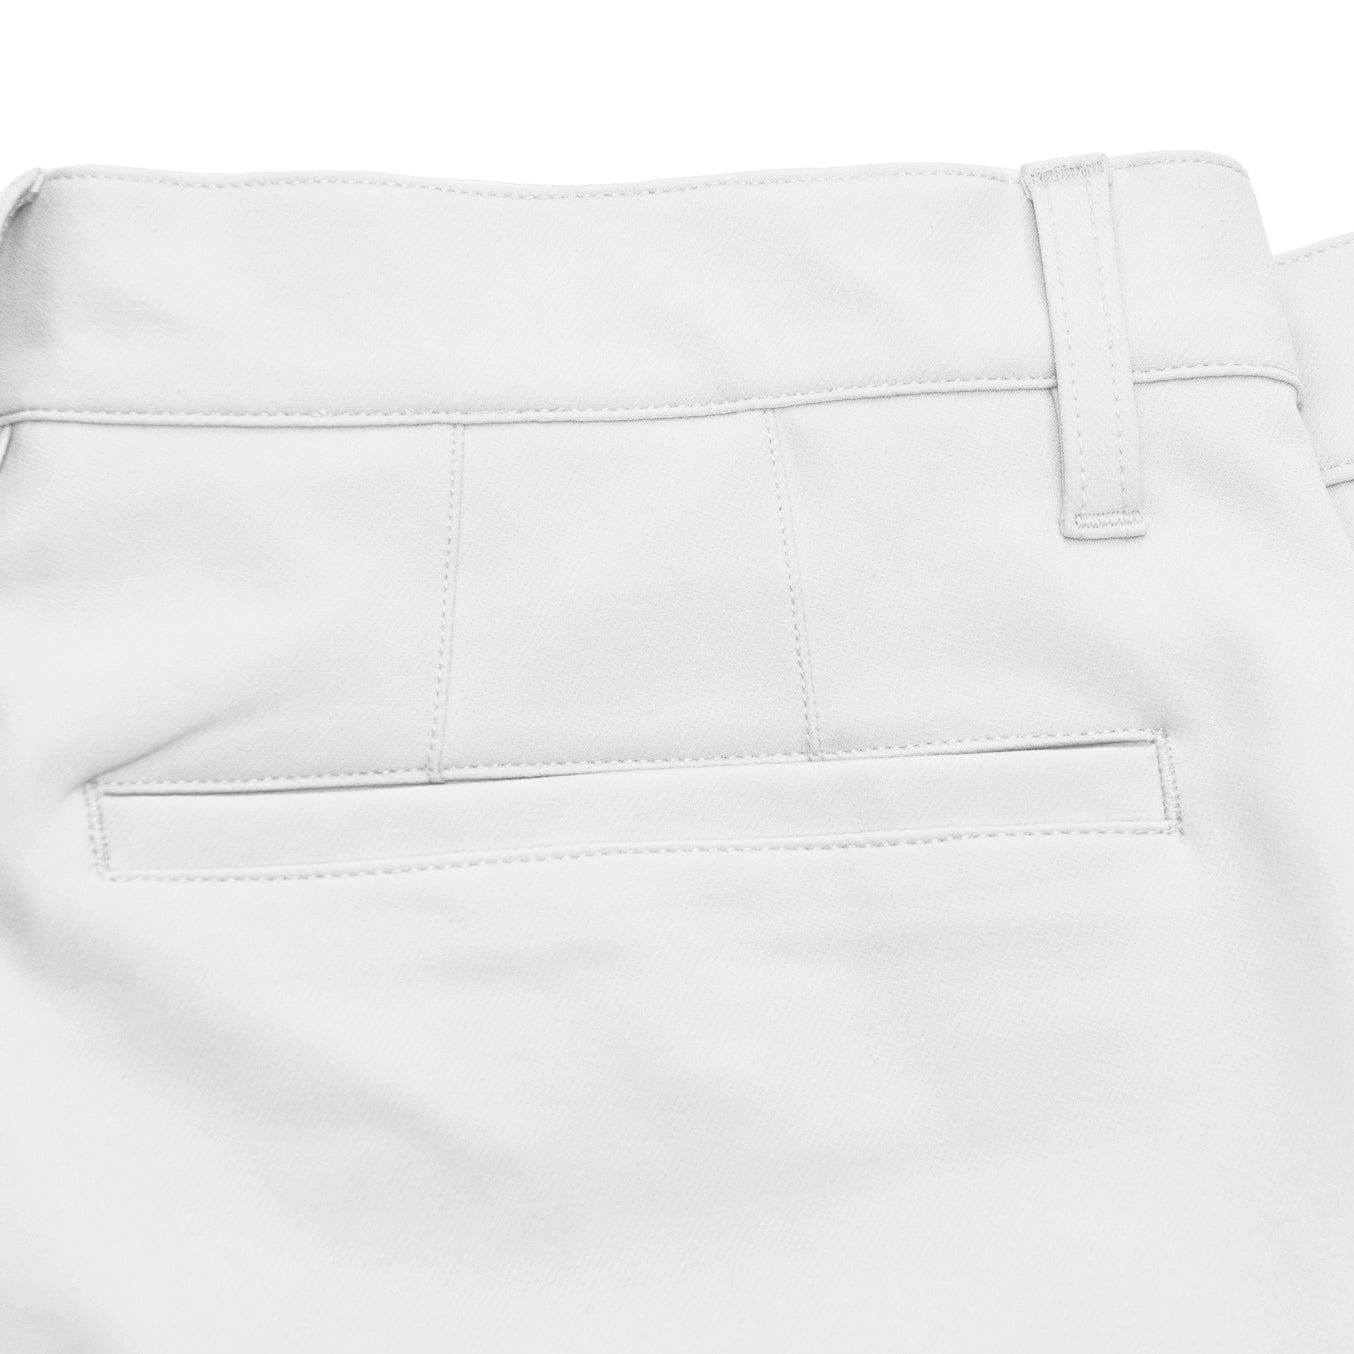 Athletic Fit Shorts - White